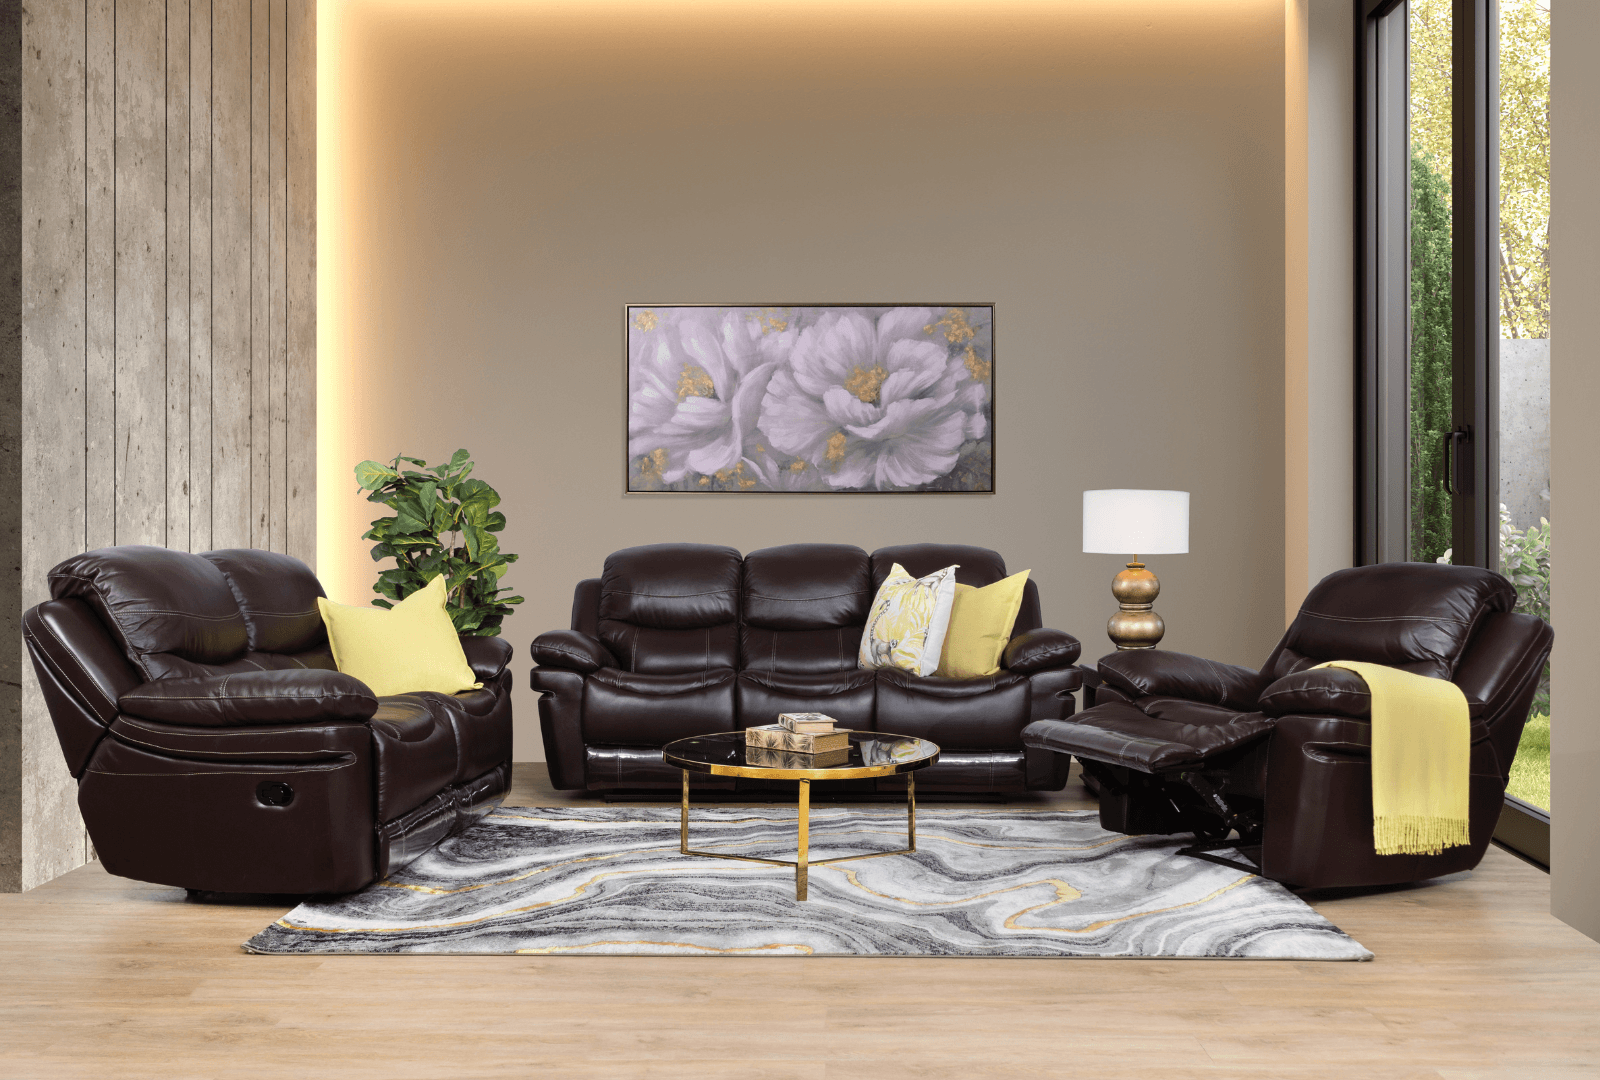 Choosing a recliner for your home